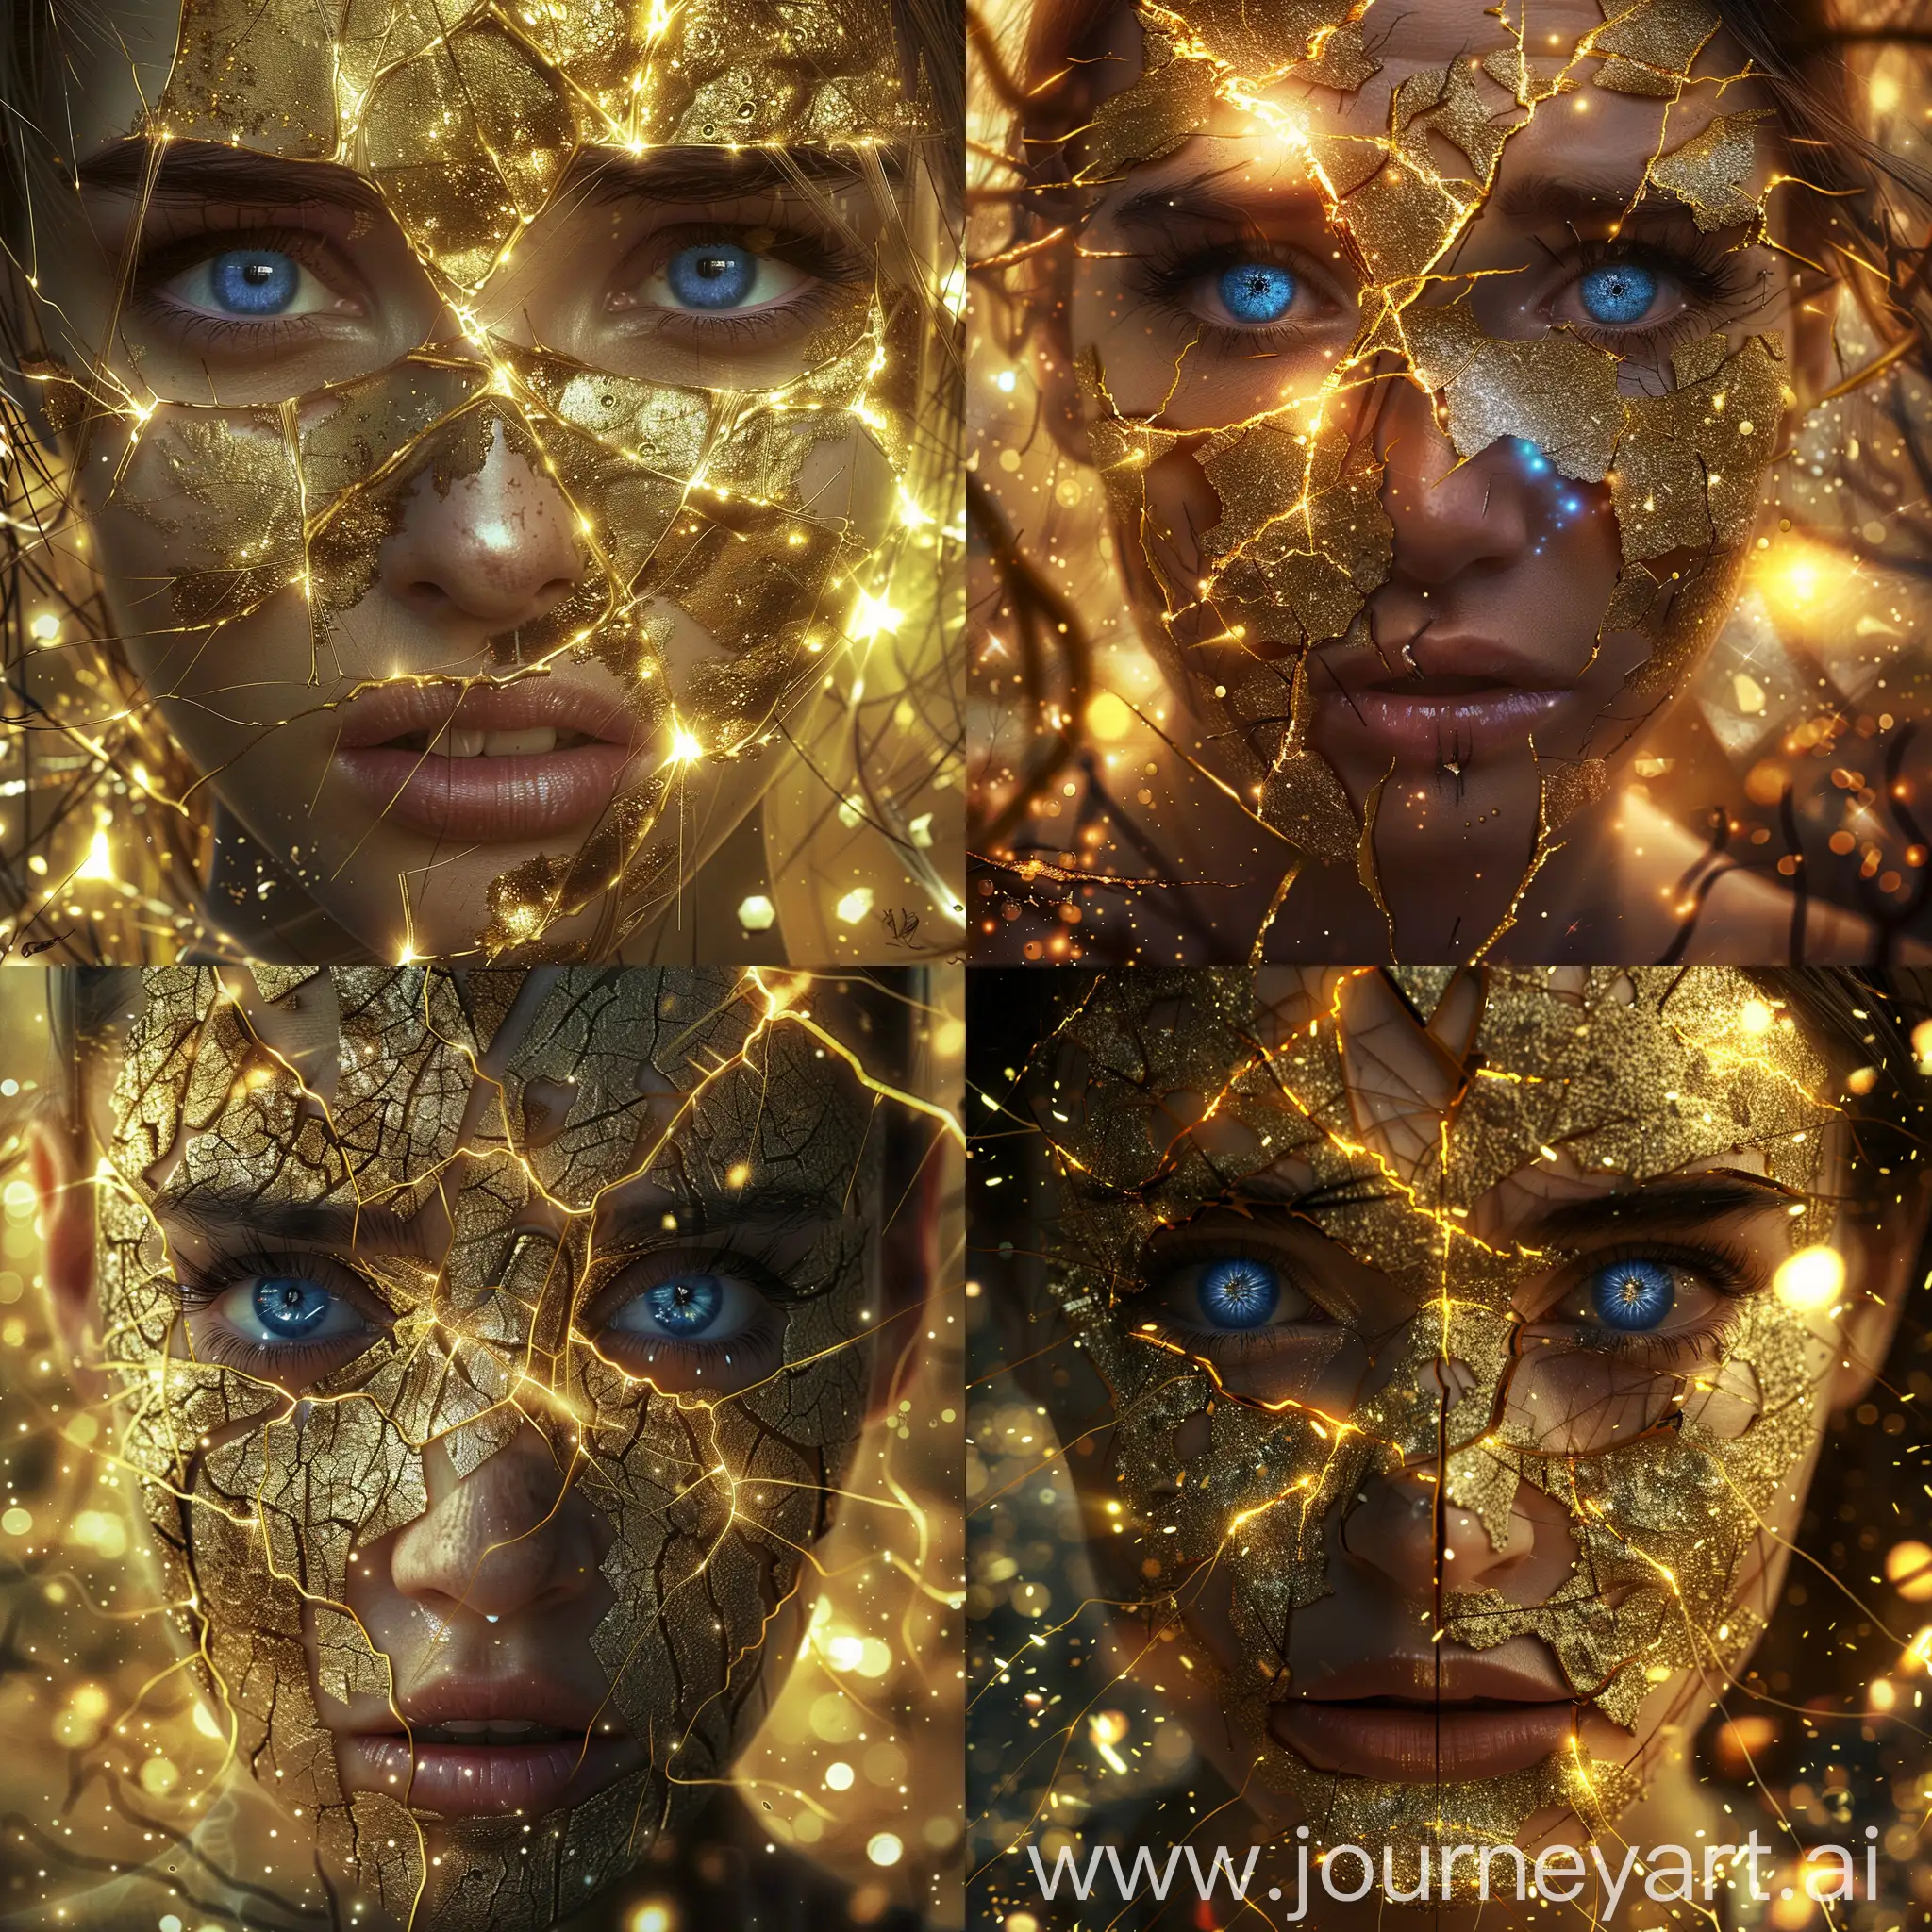 a wonderful breathtaking surreal image of a beautiful woman with sad blue eyes and a cracked beautiful face with golden repairings with shiny golden dendritic glue among the cracks of the face, ultradetailed image, hyperdetailed golden , sparkling illuminated background